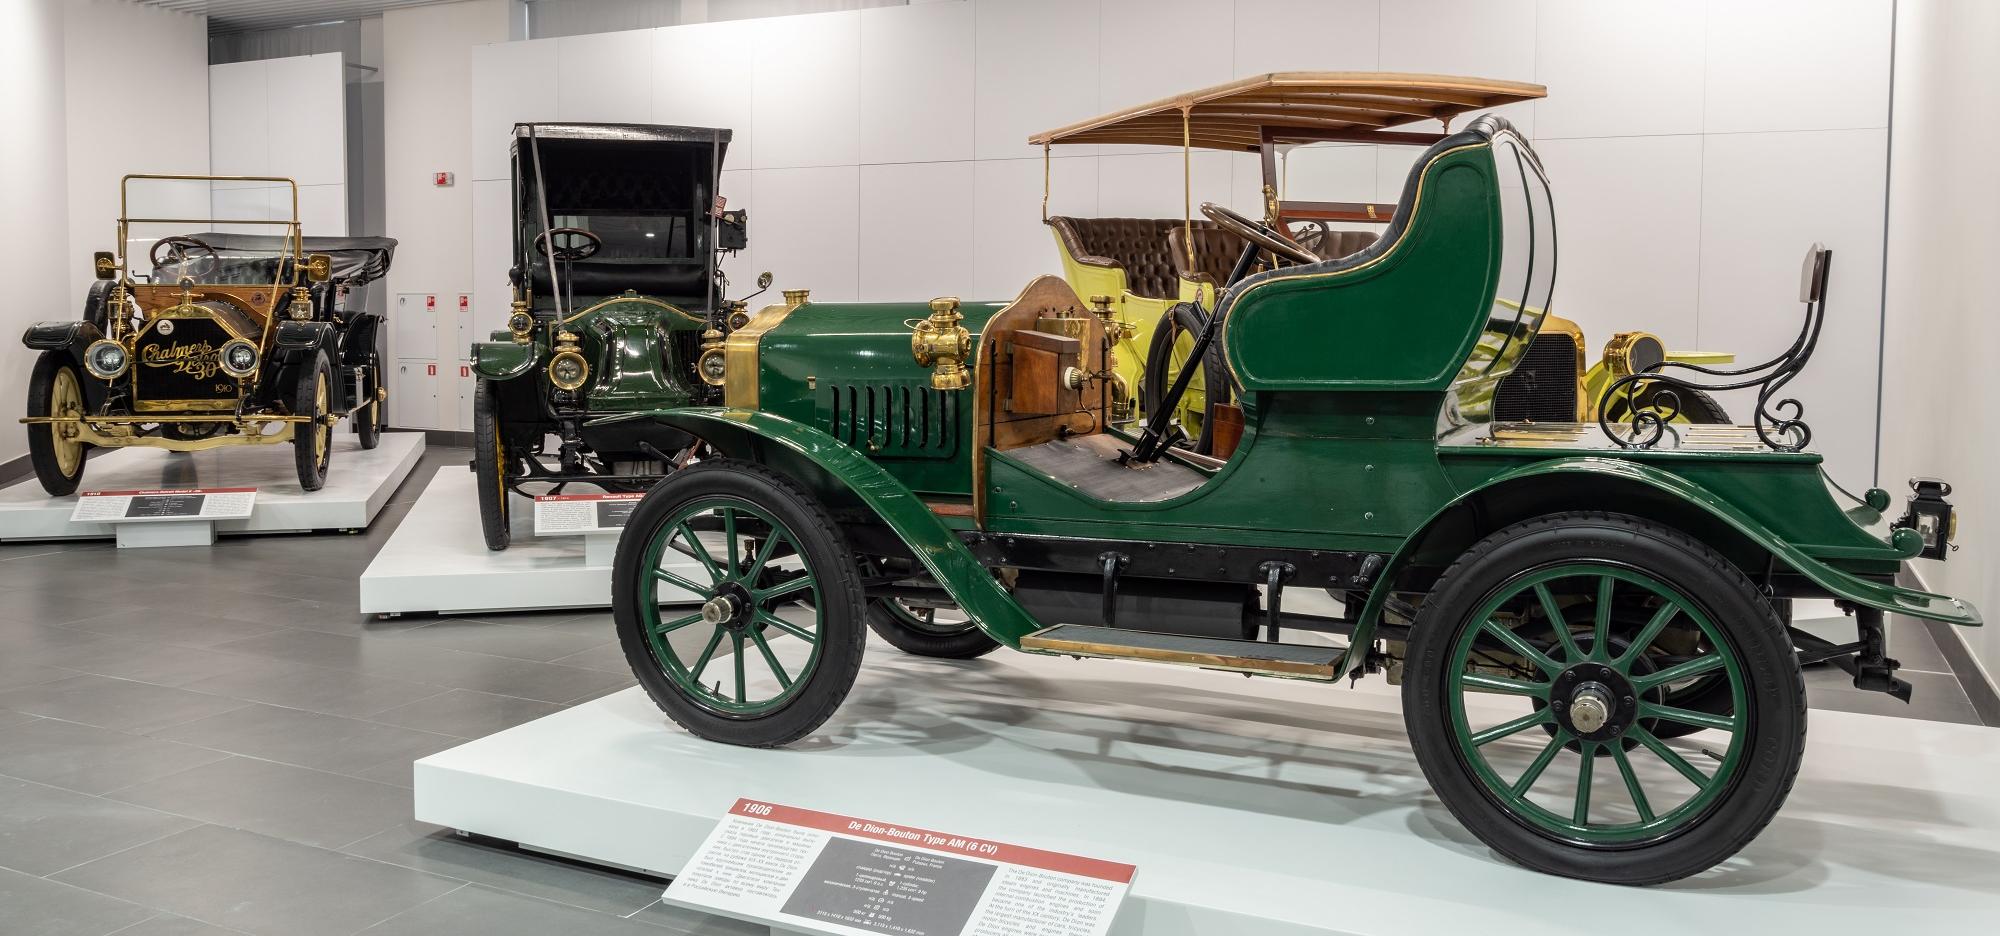 Cars from the late 19th to the early 20th centuries